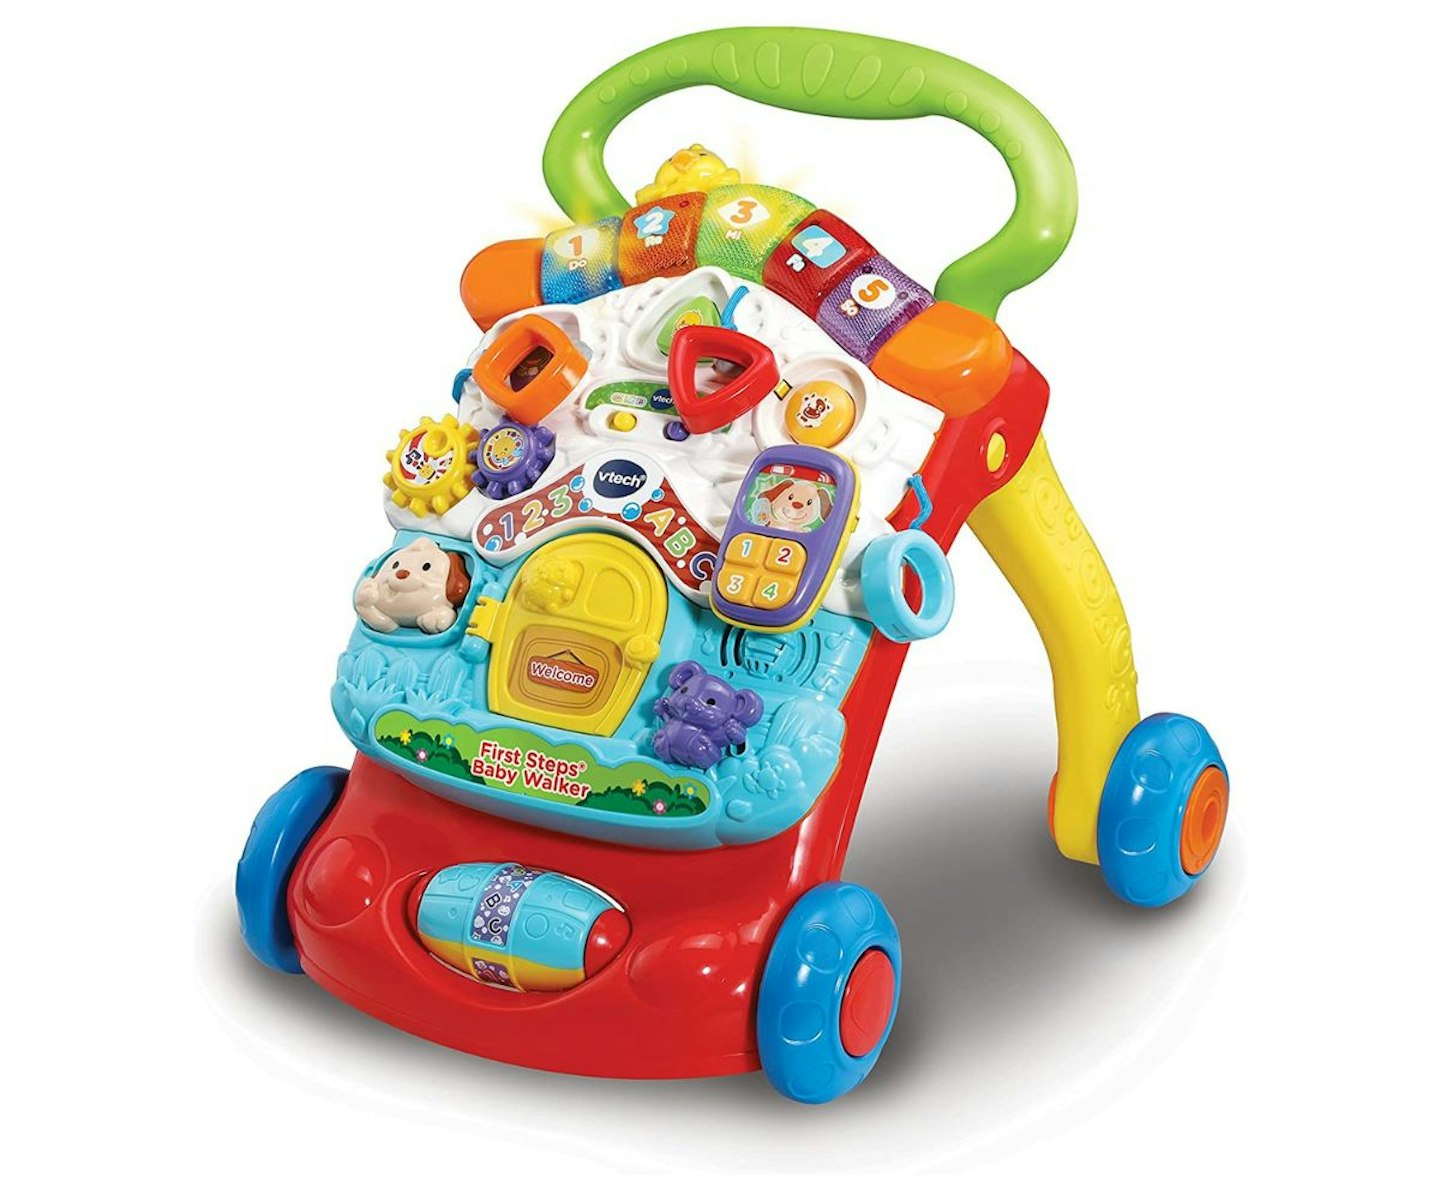 Vtech rock and roll radio.Musical and light up toddler toy. 